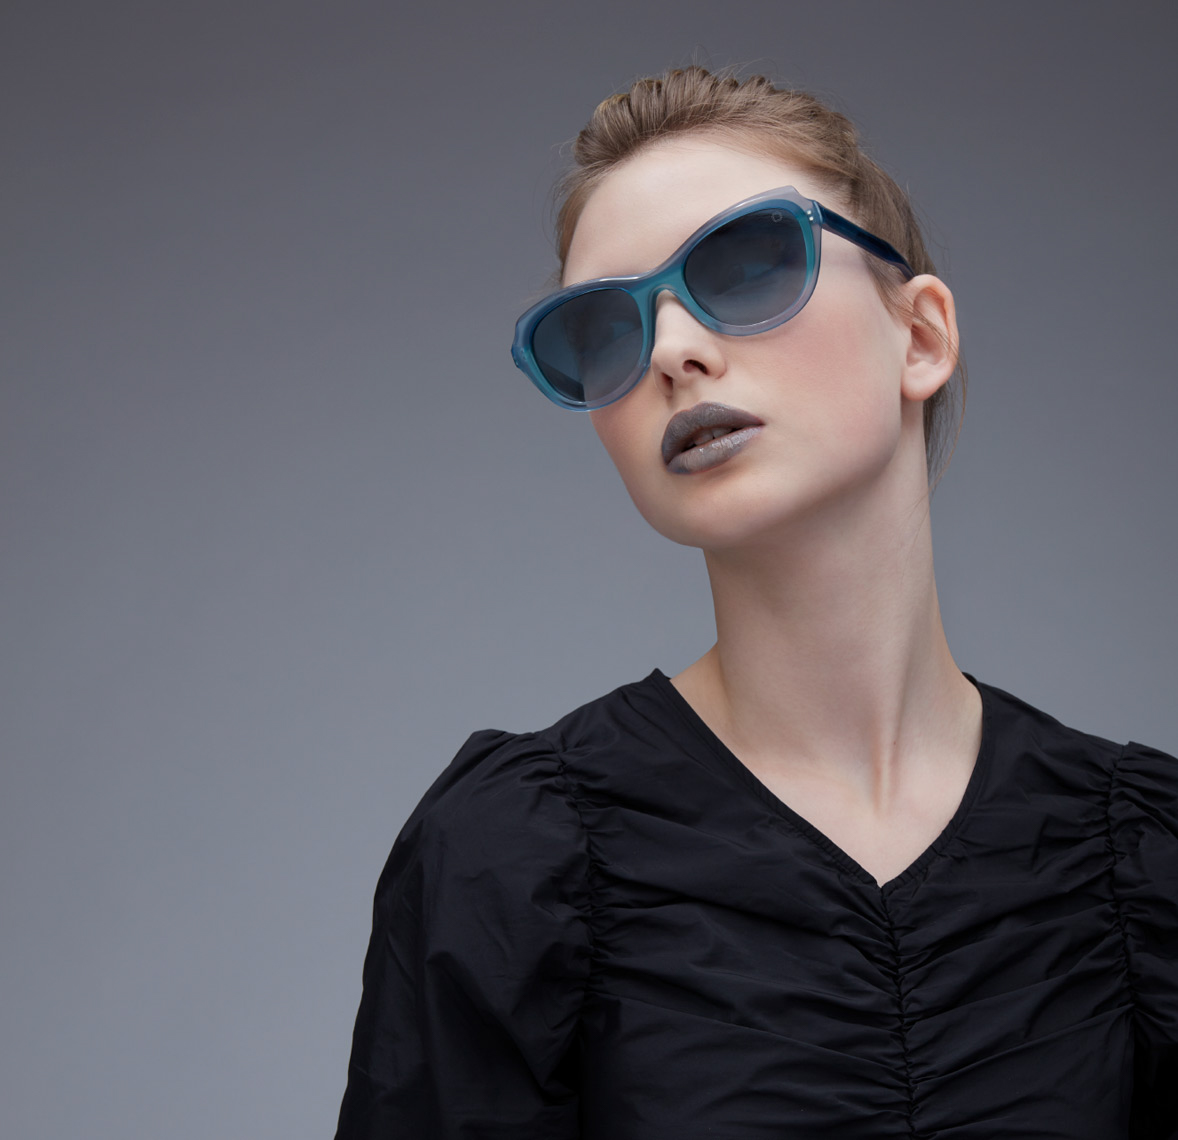 woman with grey lipstick and glasses with blue frames San Francisco fashion photographer